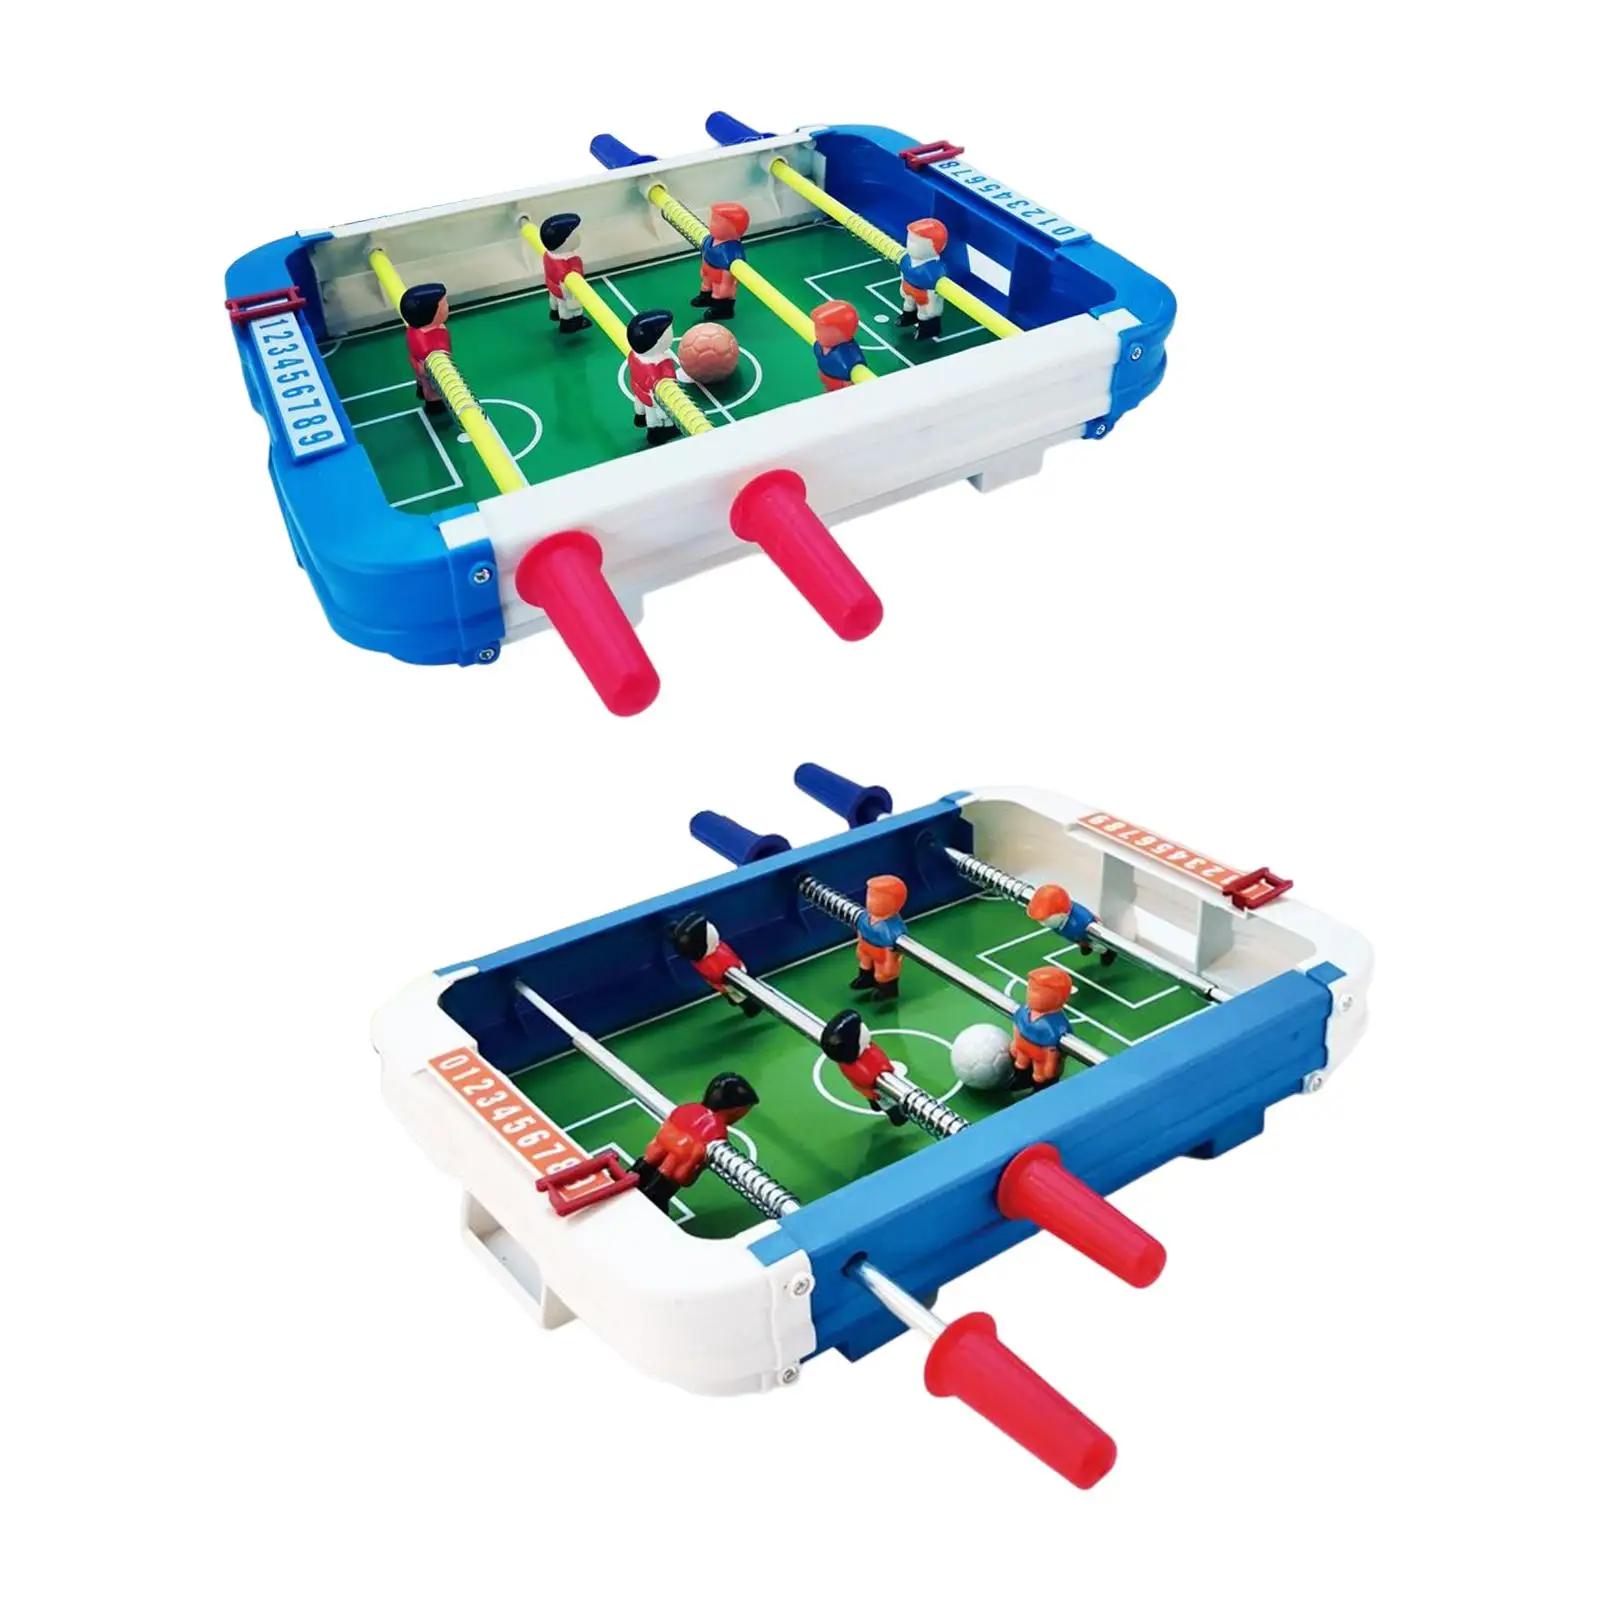 Small Foosball Table Tabletop Football Games Family Game for Birthday Gifts